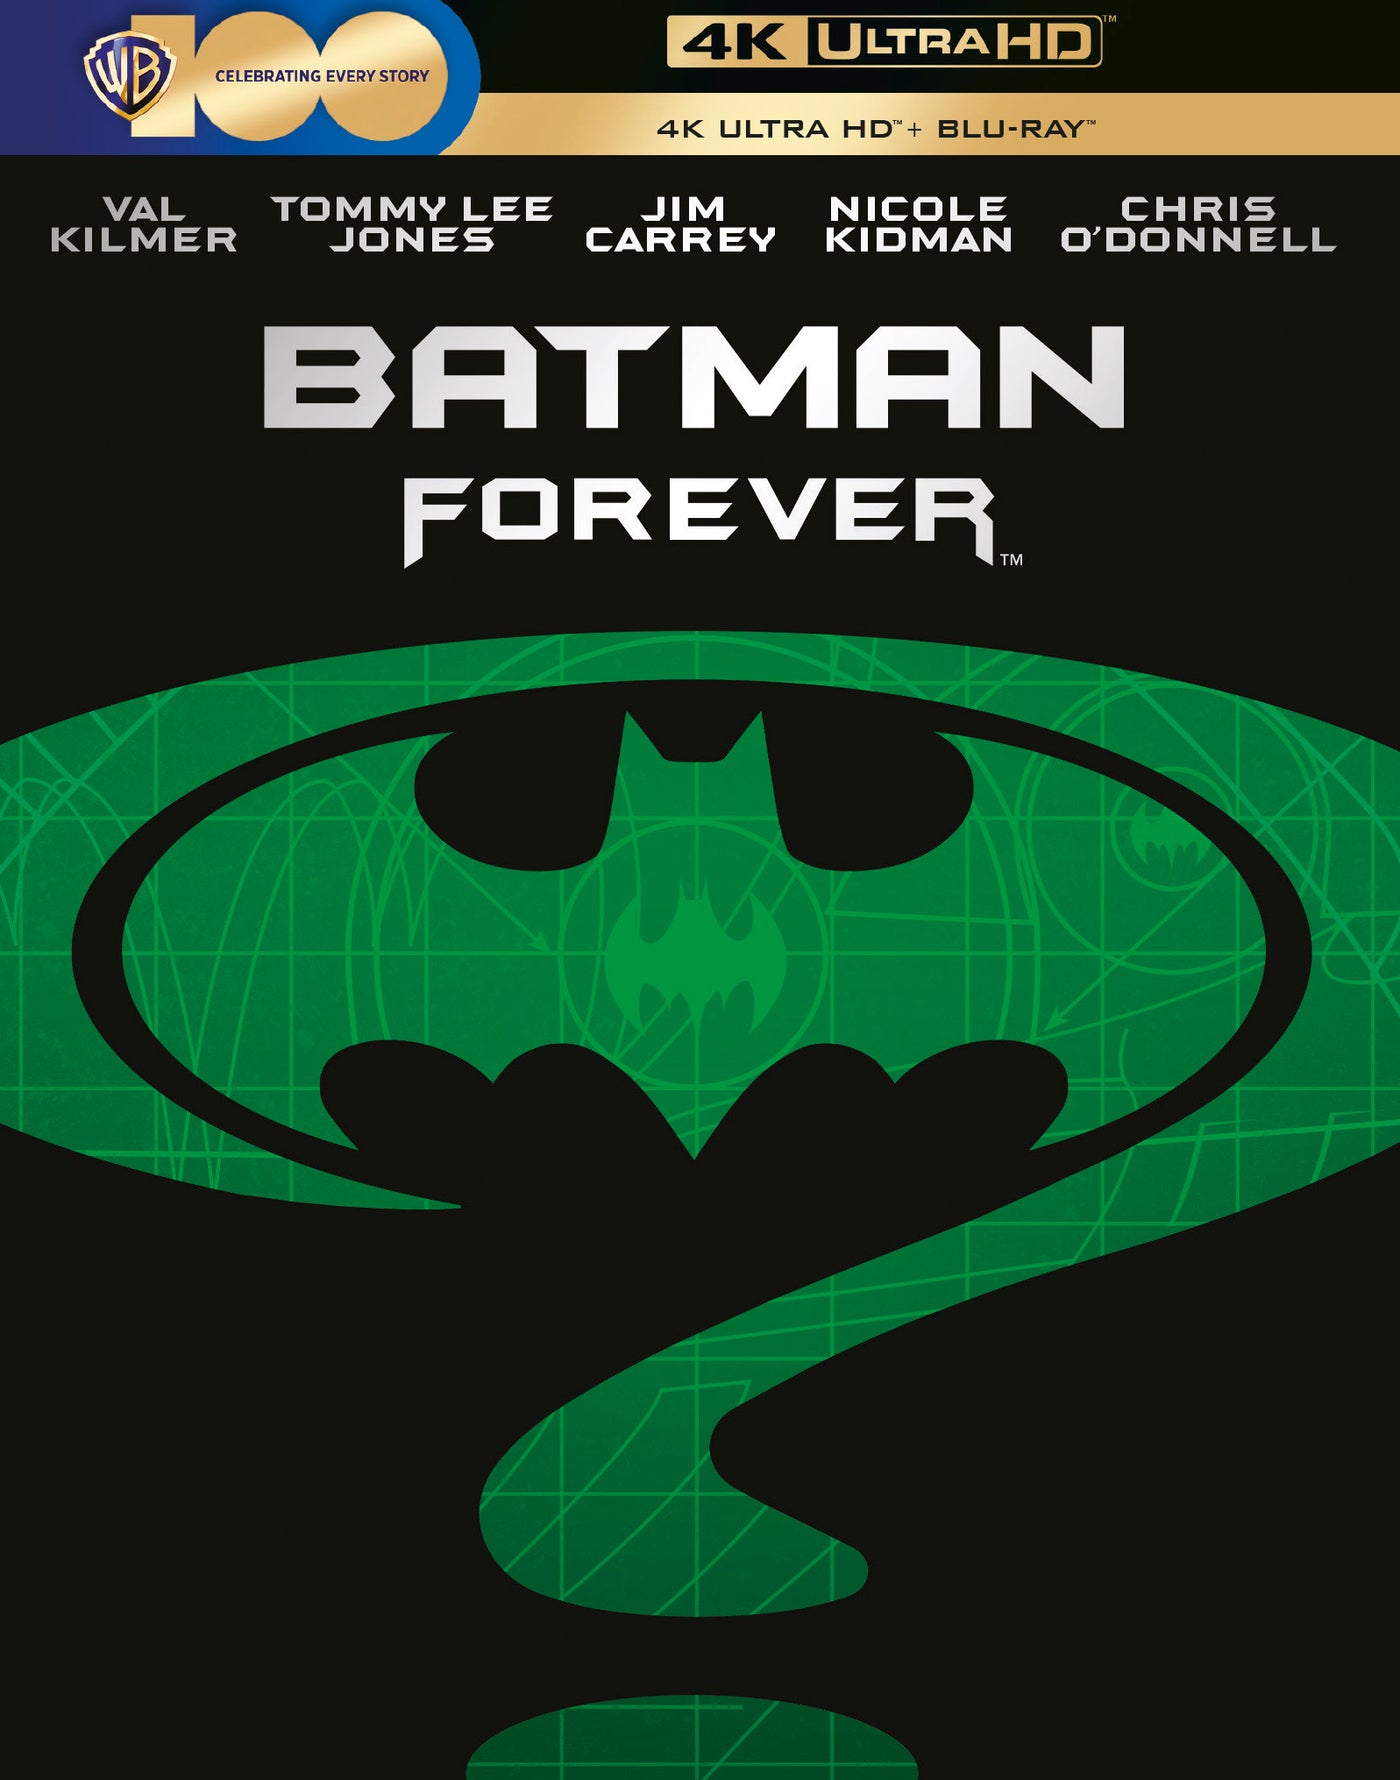 Batman Forever Ultimate Collector's Edition with Steelbook (4K Ultra HD) (1995)